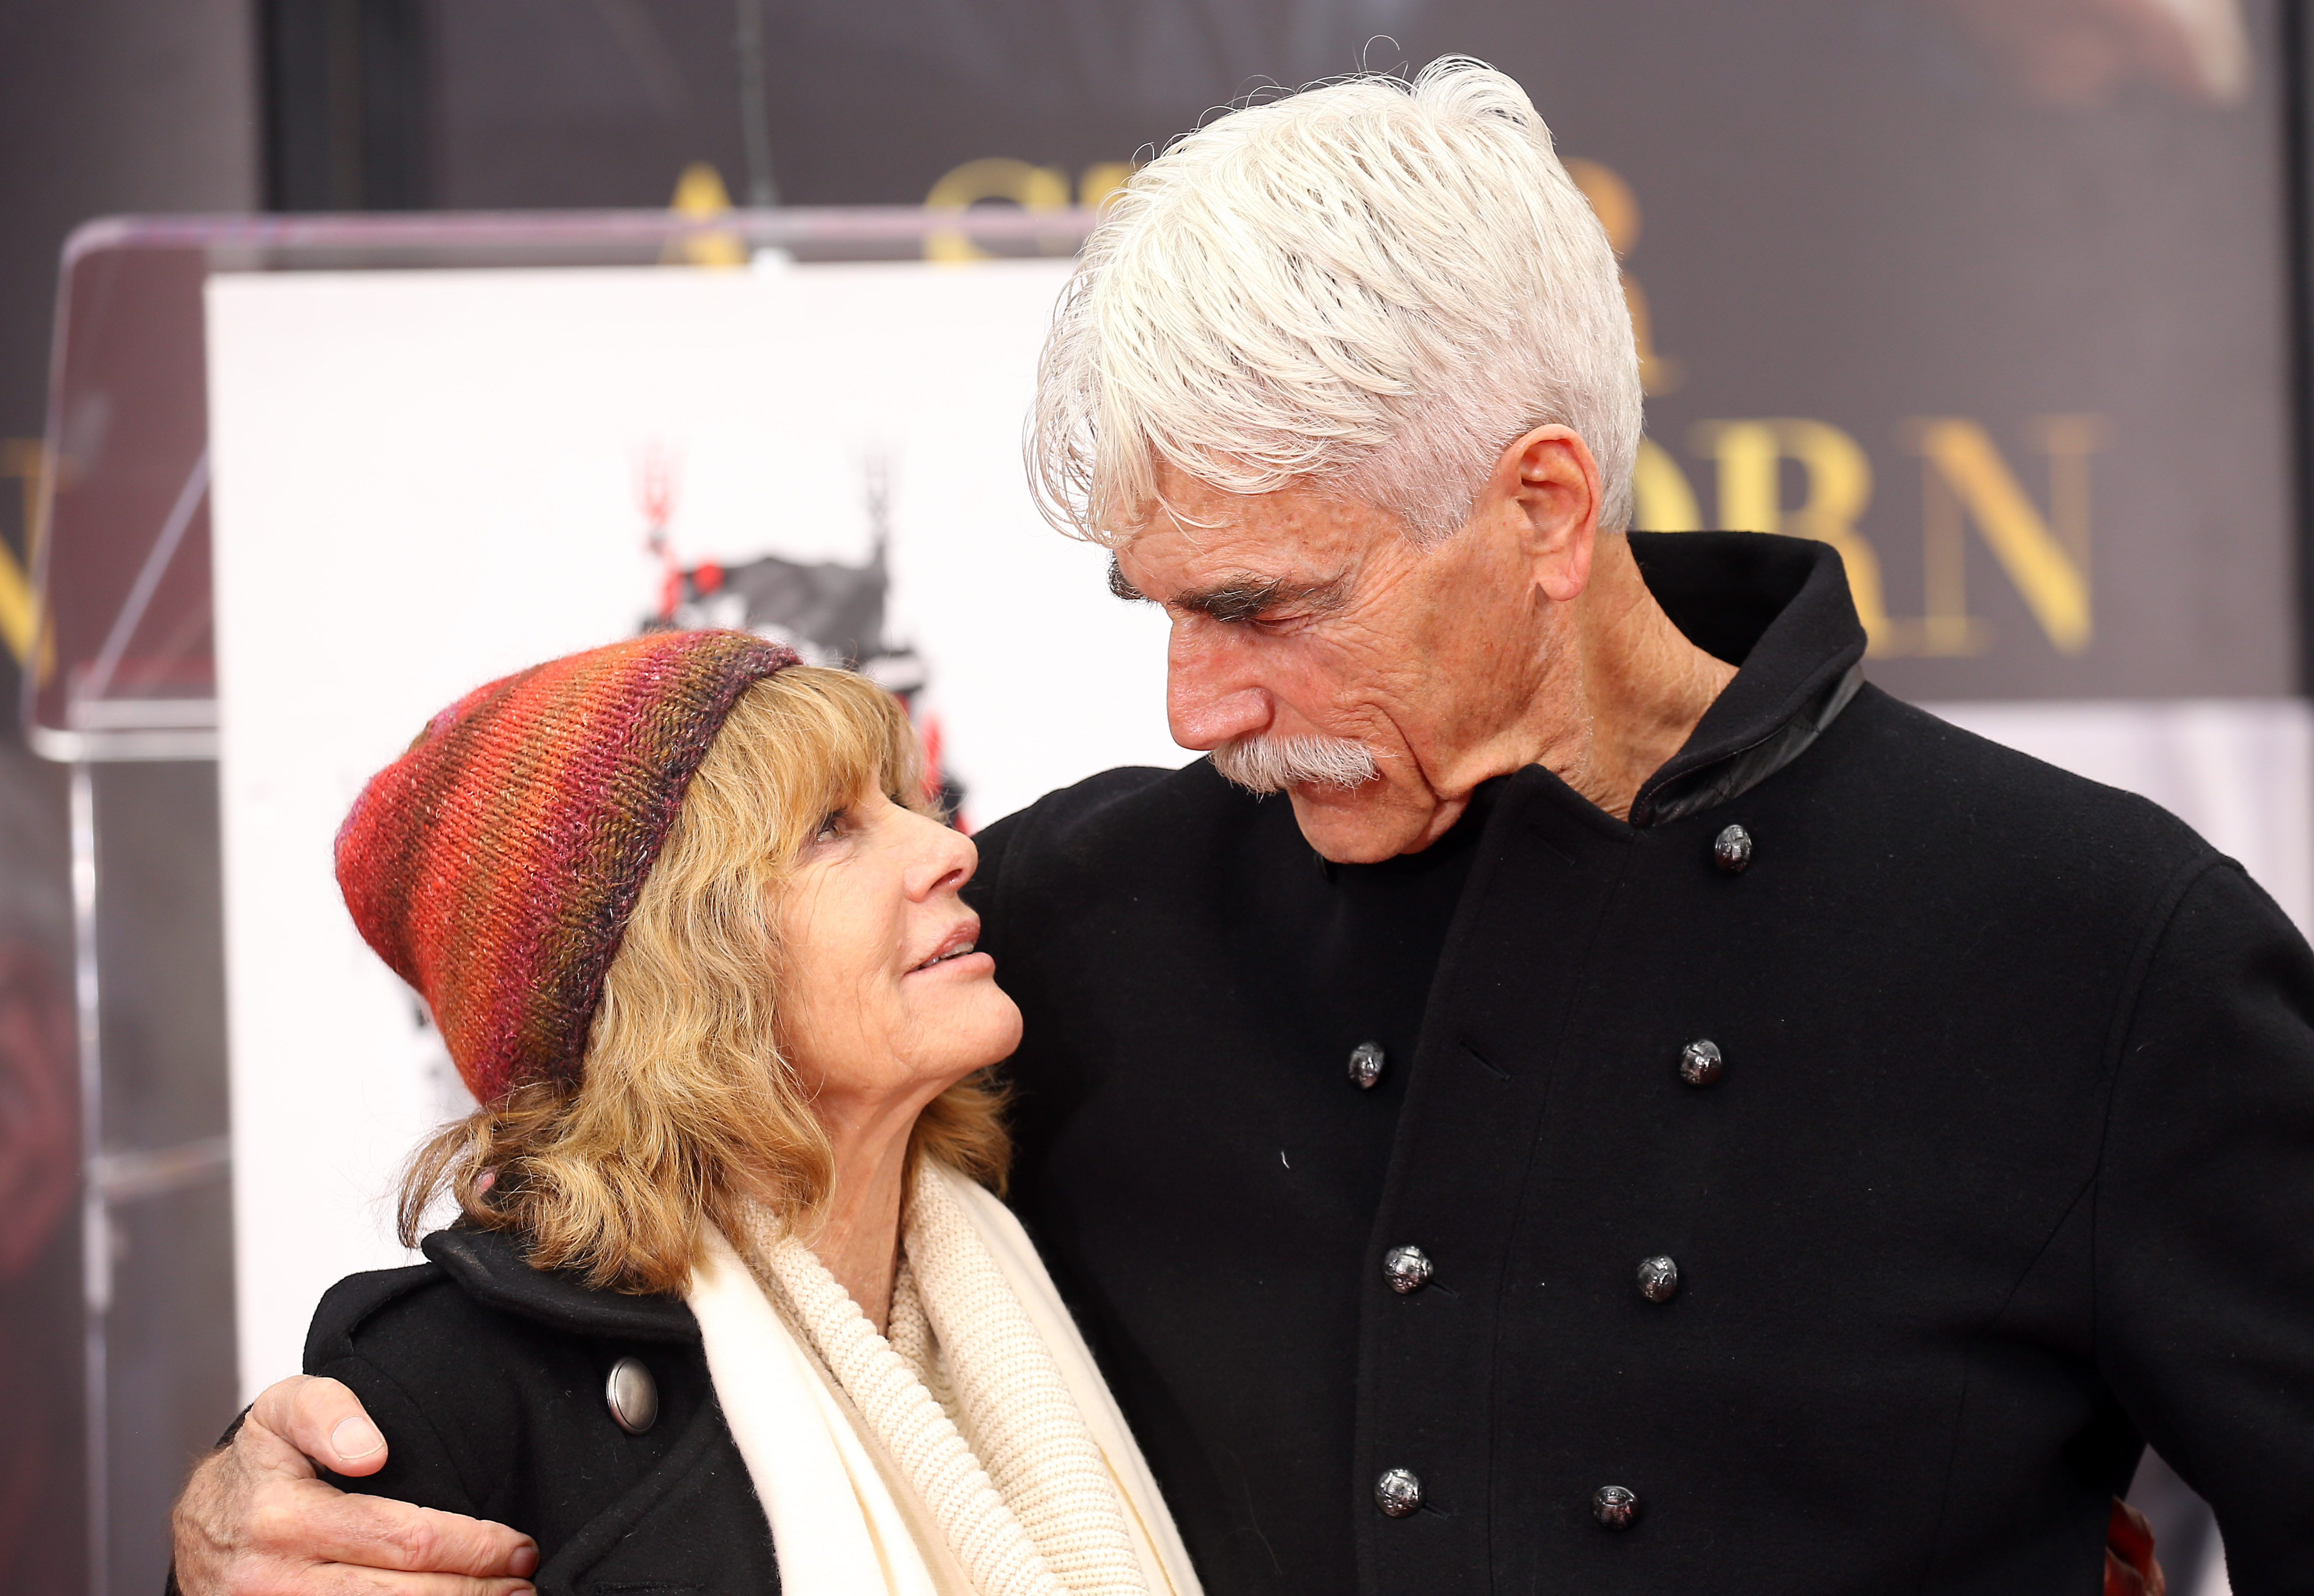 Sam Elliott and Katharine Ross at a hand and footprint ceremony for Sam Elliott on January 07, 2019, in Hollywood. │ Source: Getty Images